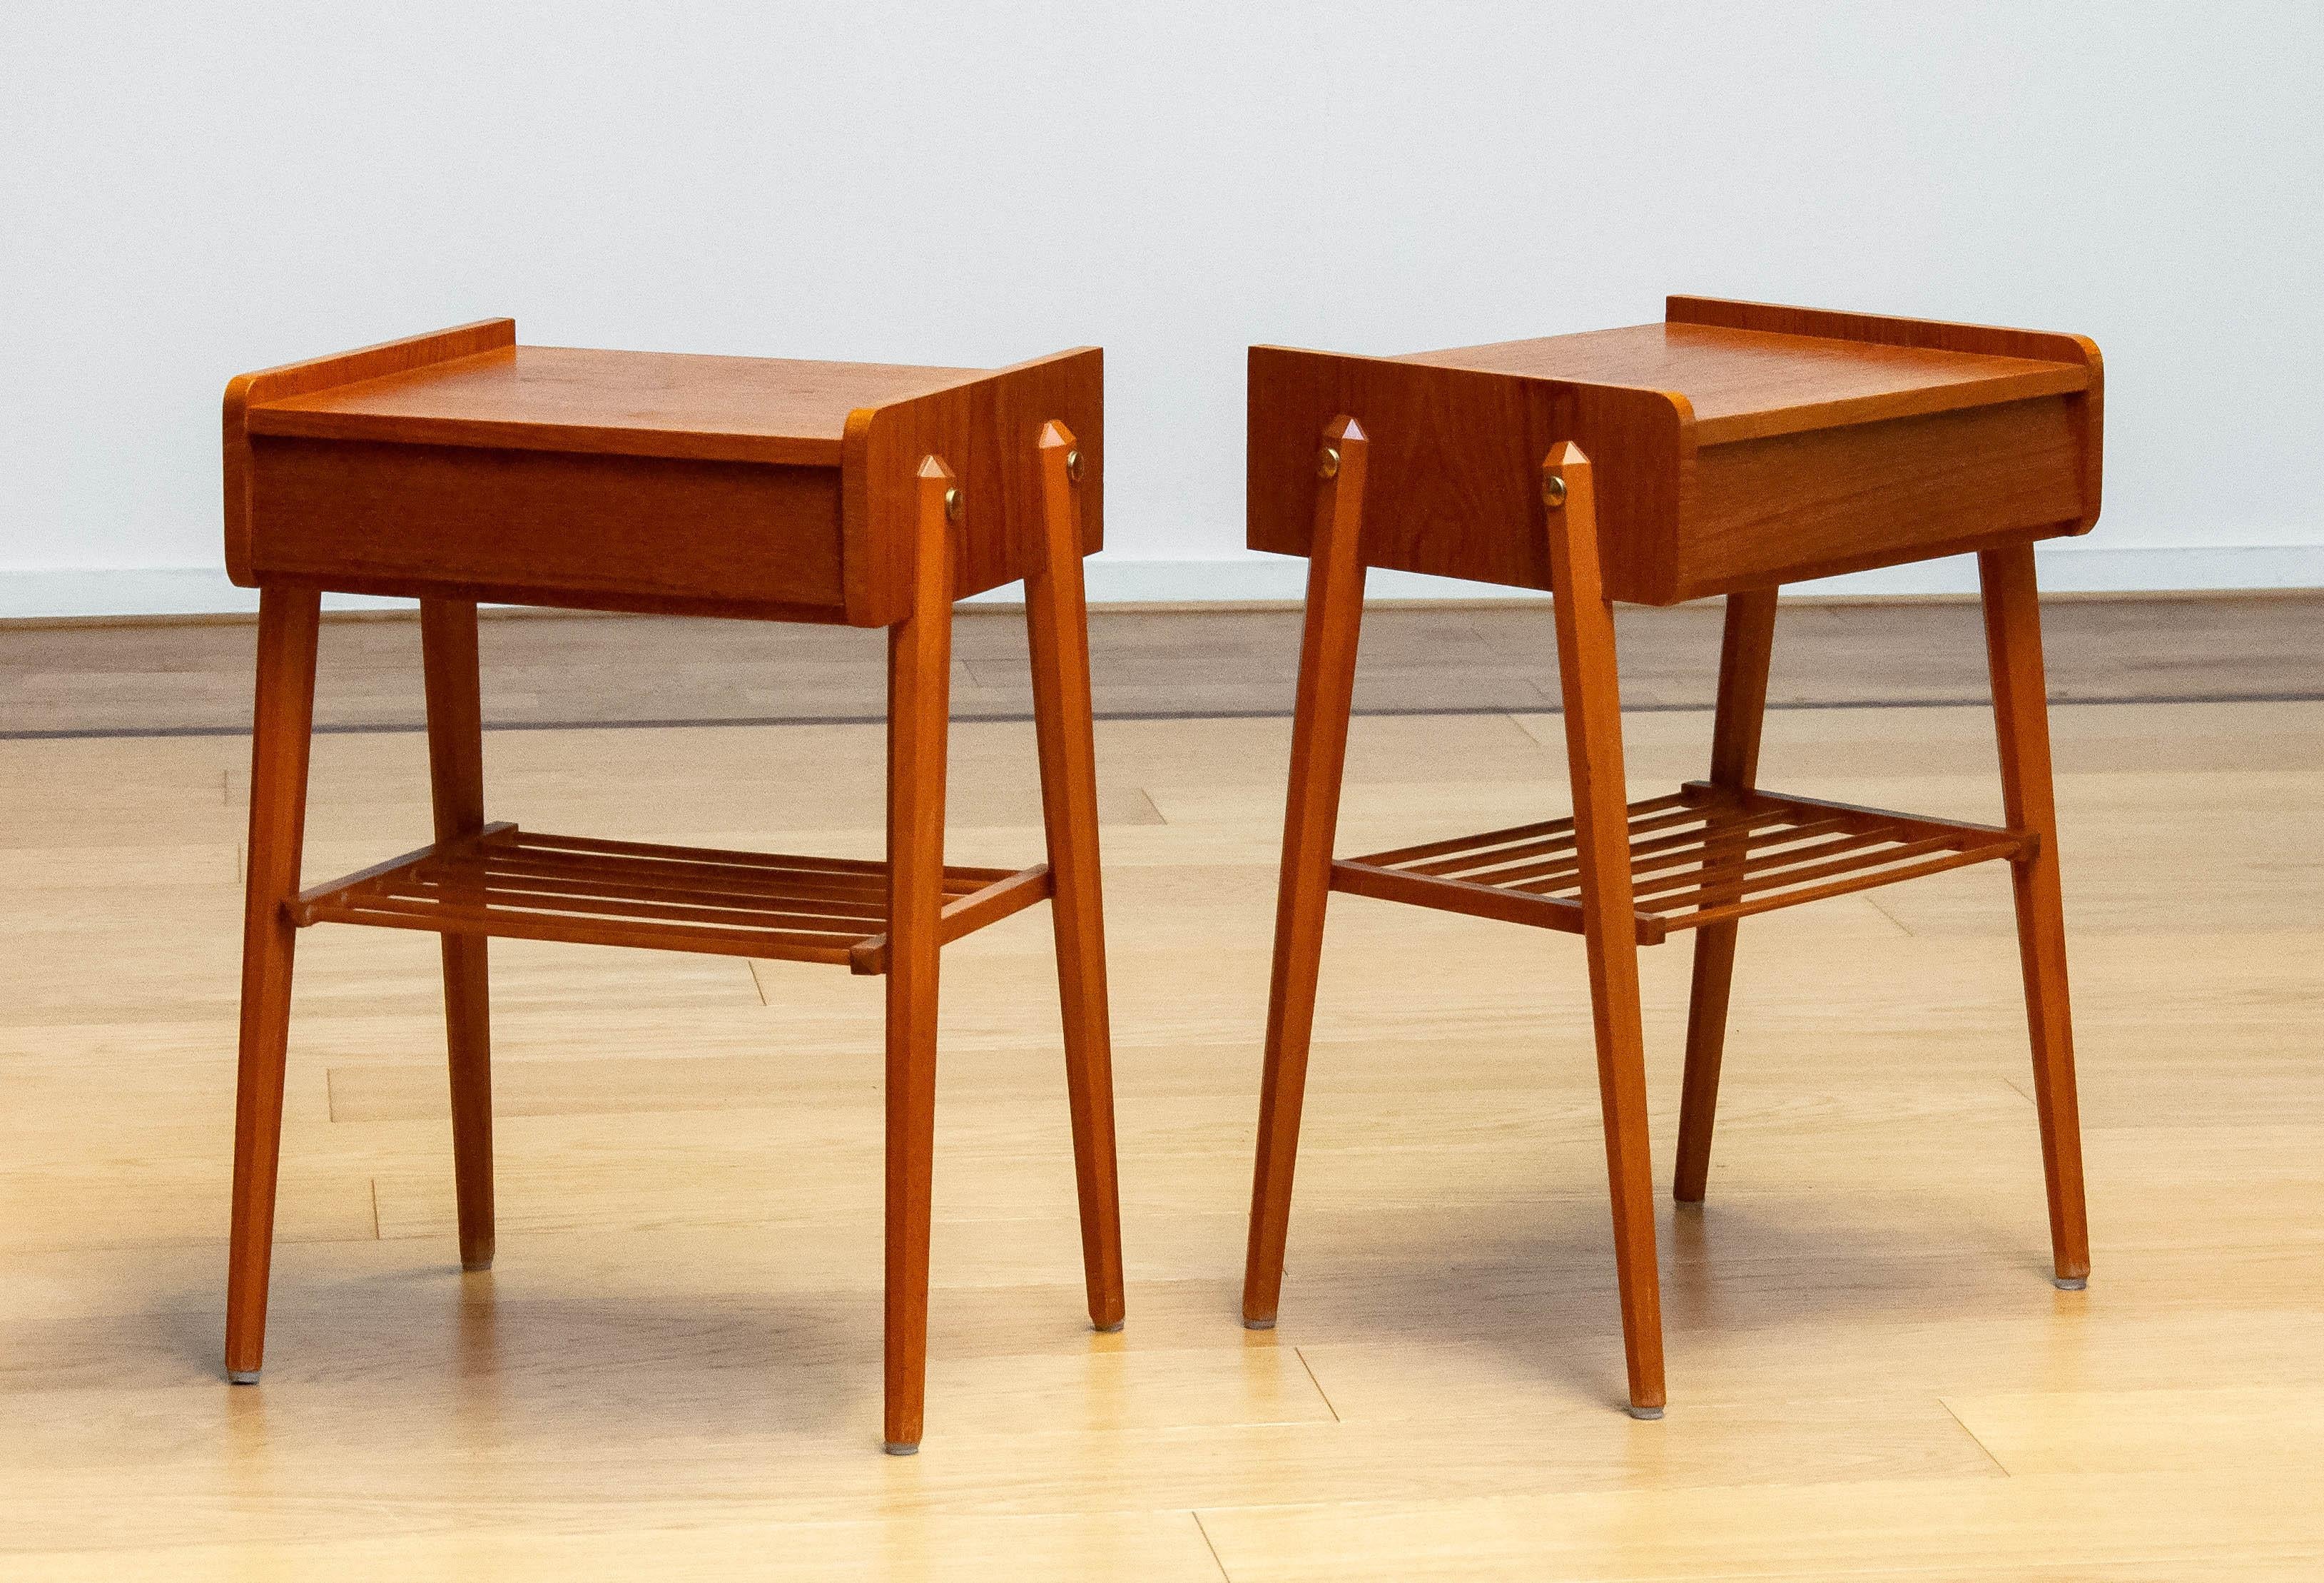 1950s Pair Swedish Night Stands / Bed side Tables By AB Bjärni Made Of Teak 4